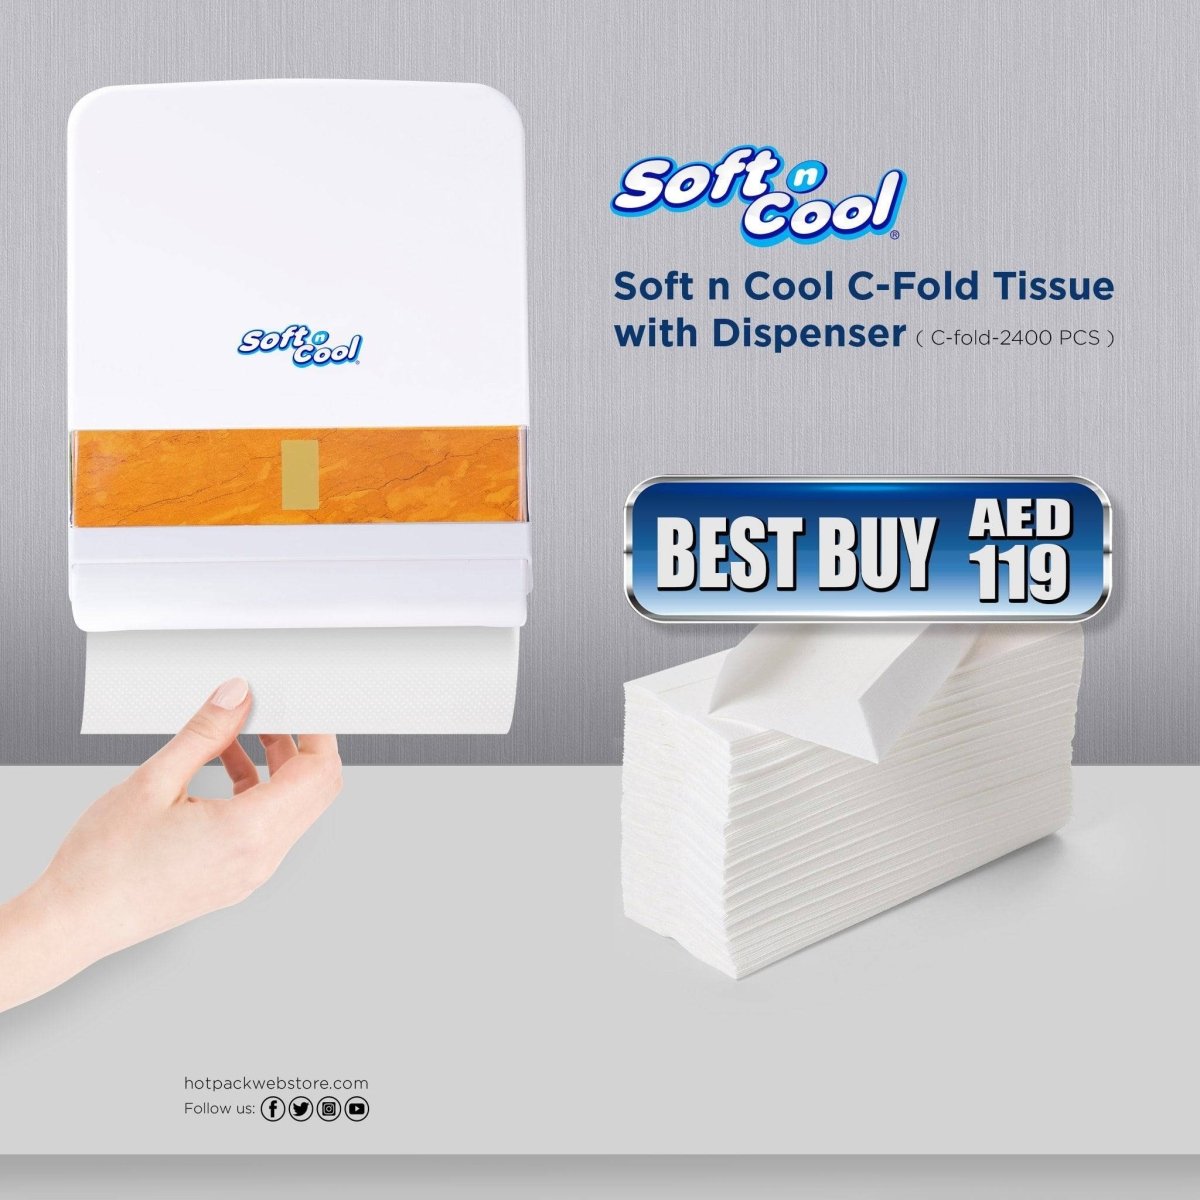 Soft N Cool C - Fold Tissue 2400 Pieces with Dispenser - hotpackwebstore.com - C - Fold Tissue